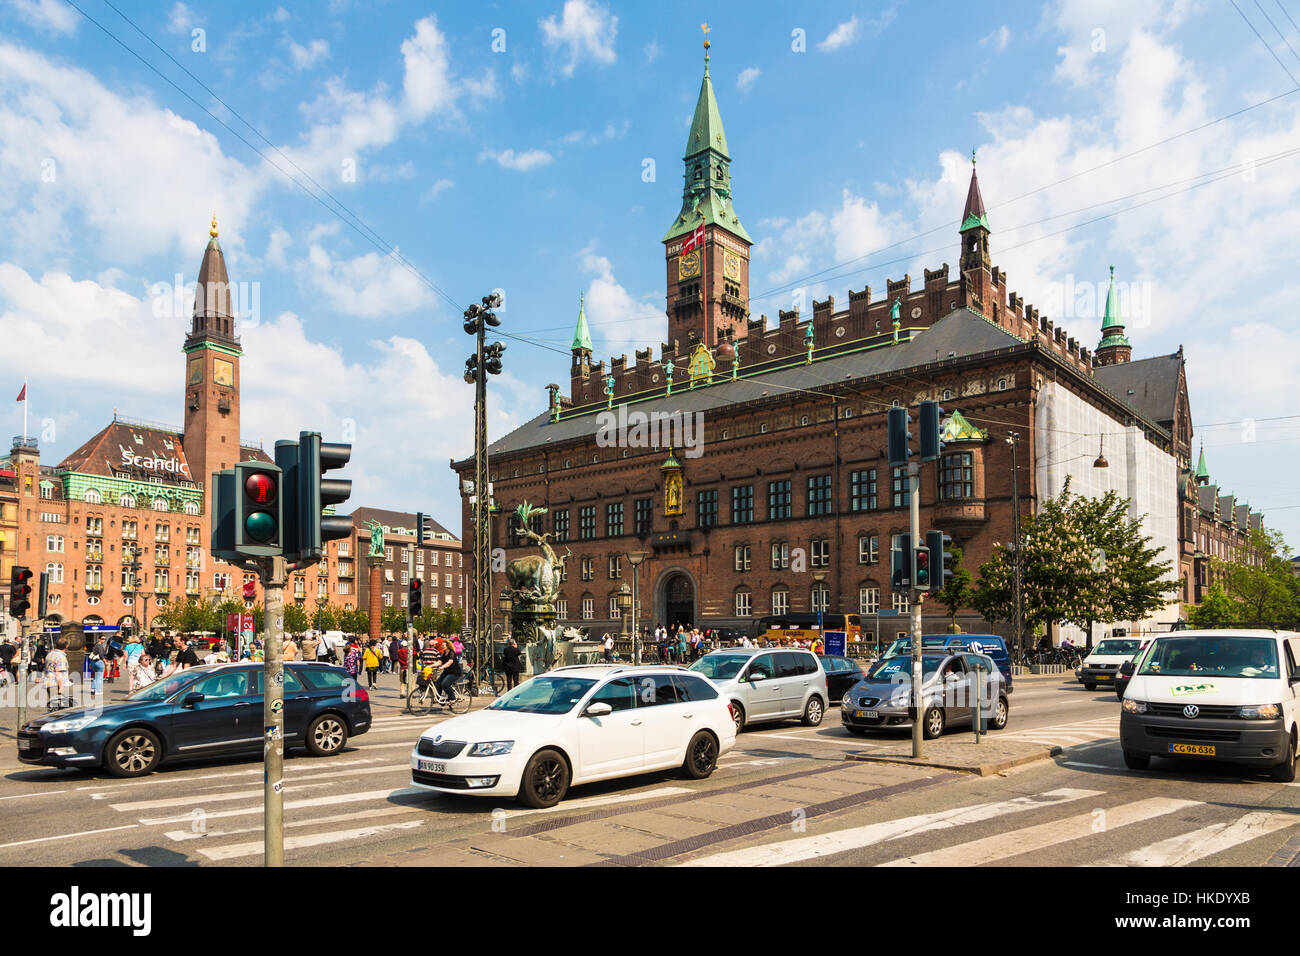 COPENHAGEN, DENMARK - MAY 24, 2016: Cars cross an intersection in front of the city hall in Denmark capital city on a sunny summer day. Stock Photo